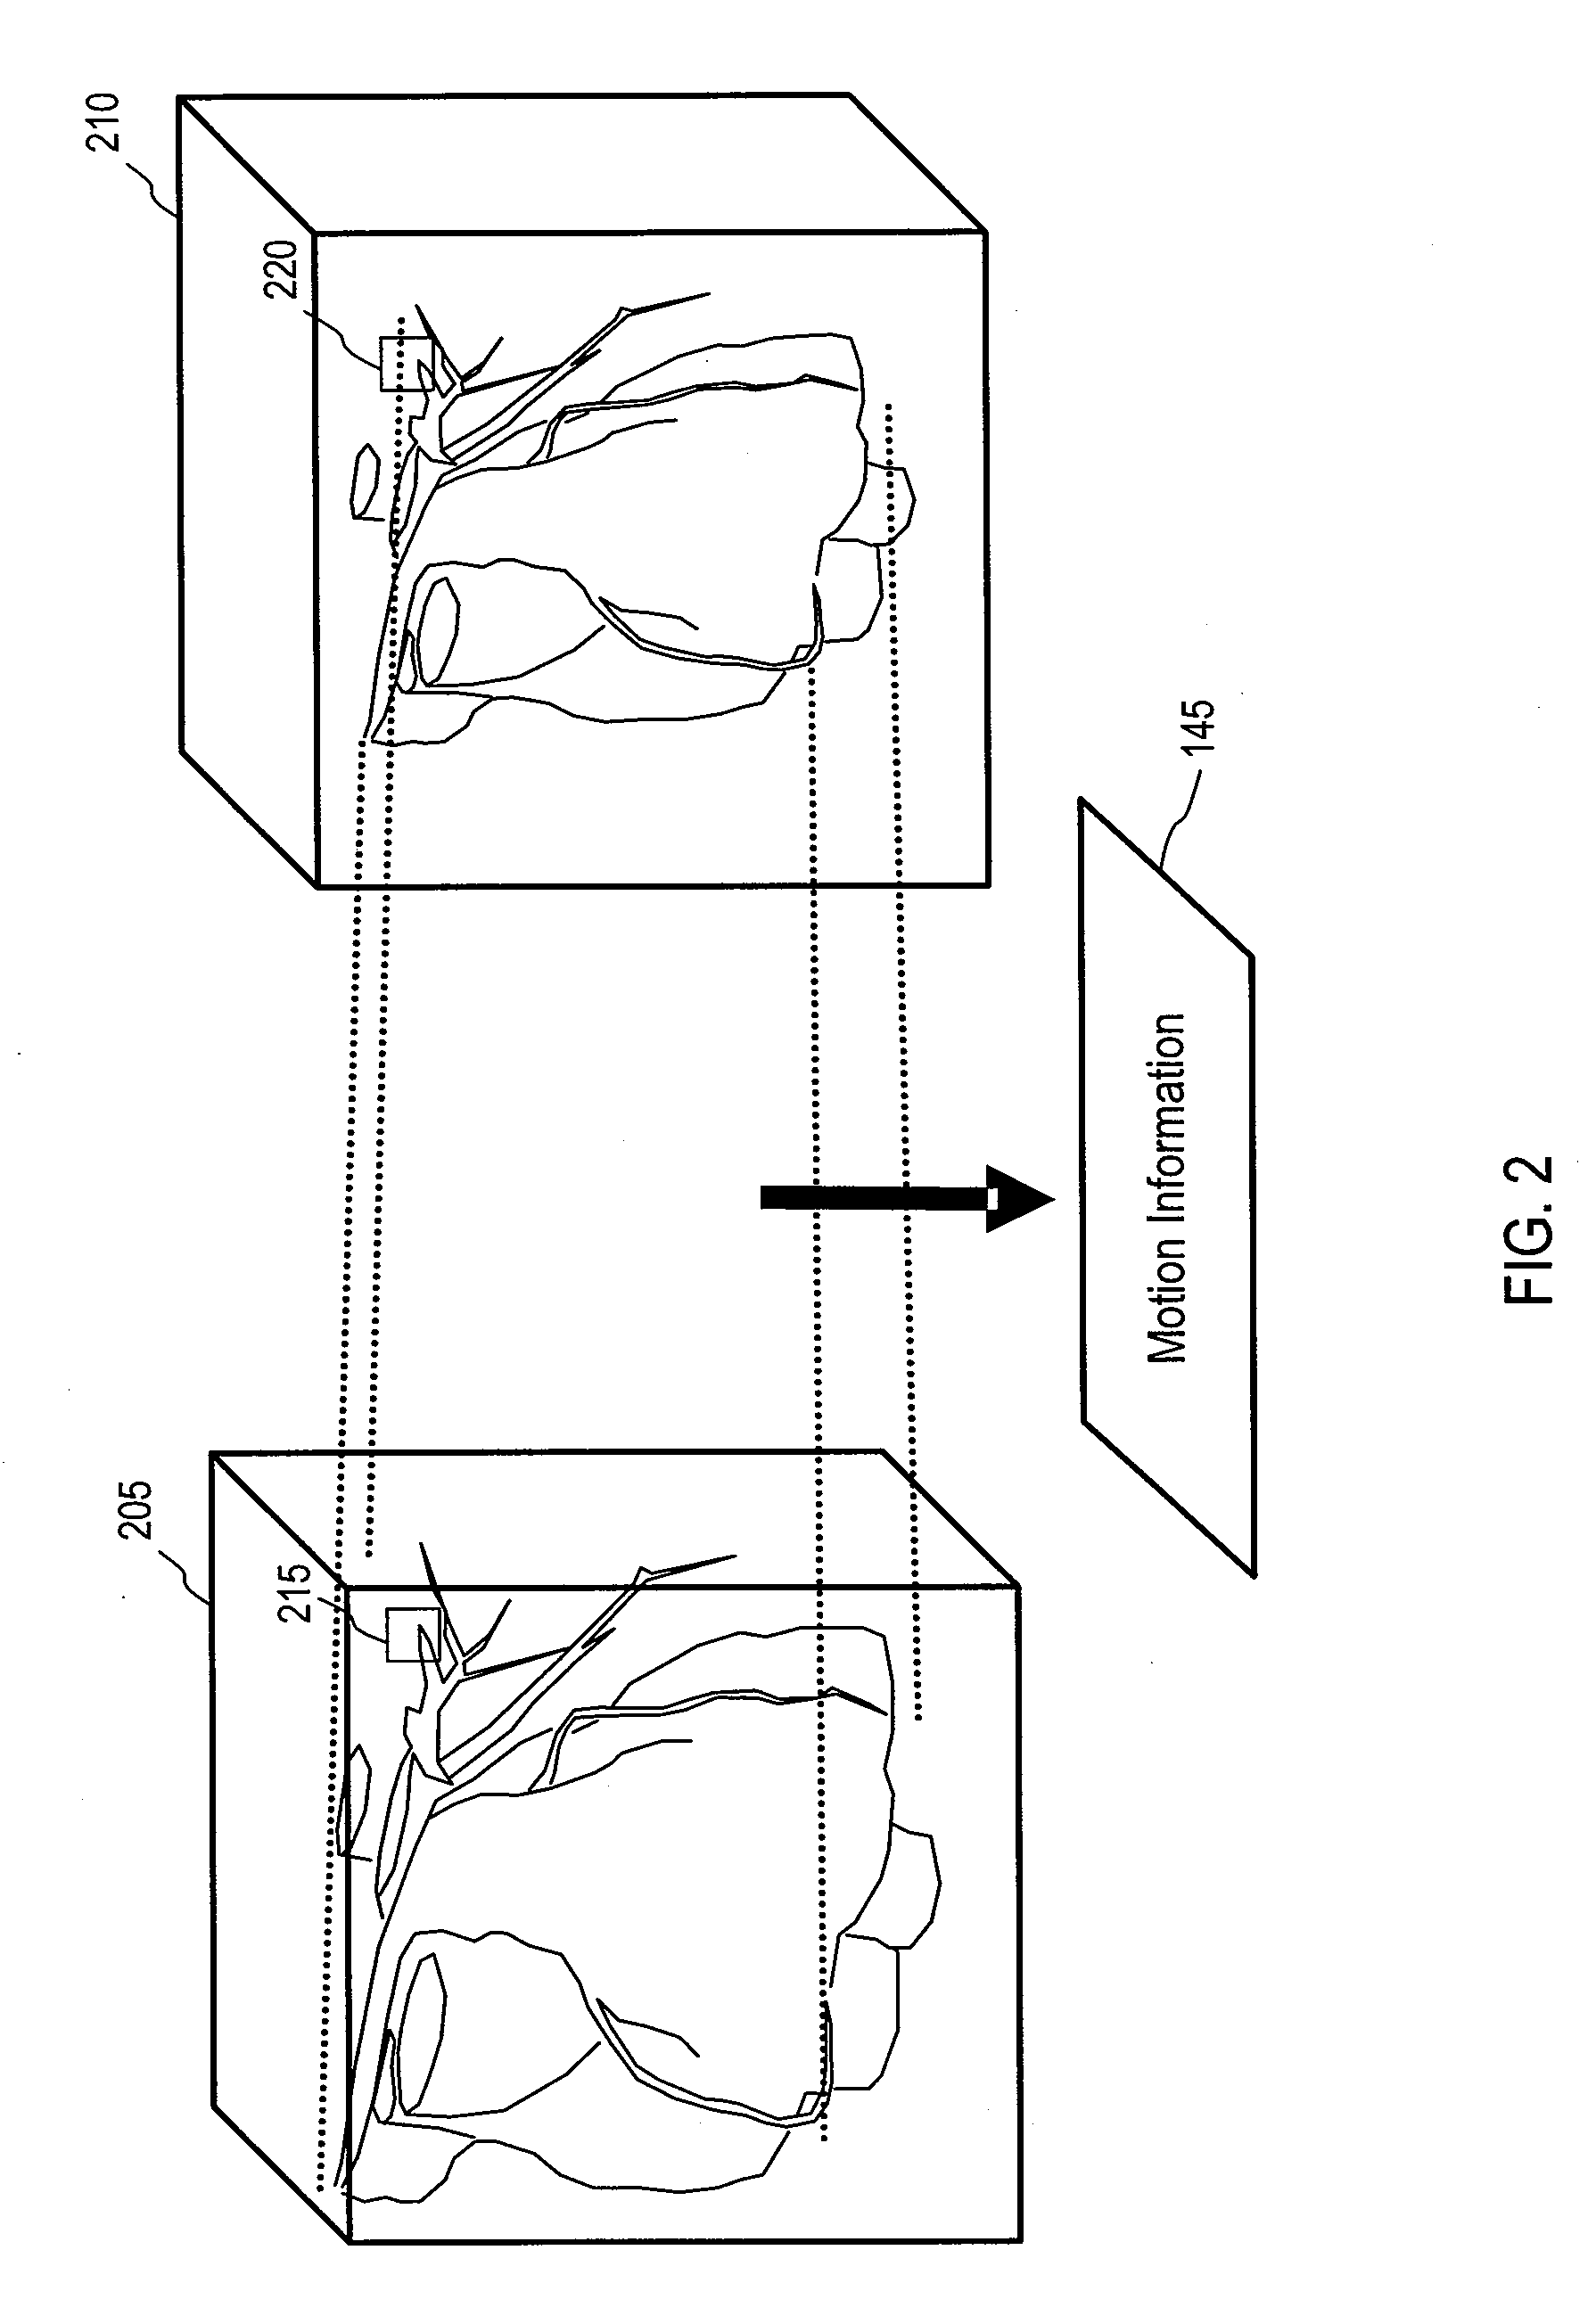 Computer readable medium, systems and methods for improving medical image quality using motion information